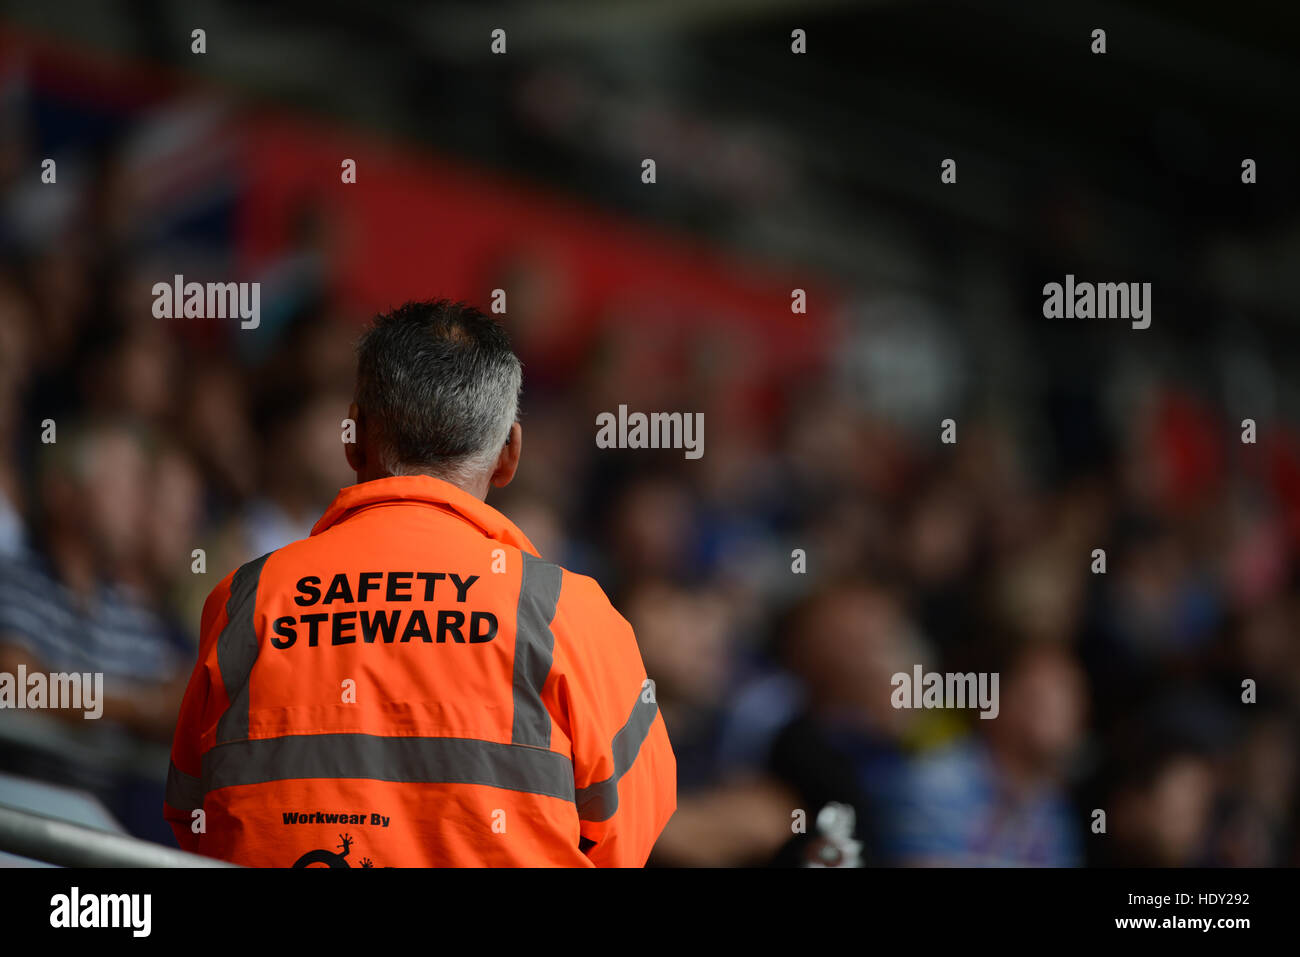 A safety steward at a sporting event in the UK. Stock Photo